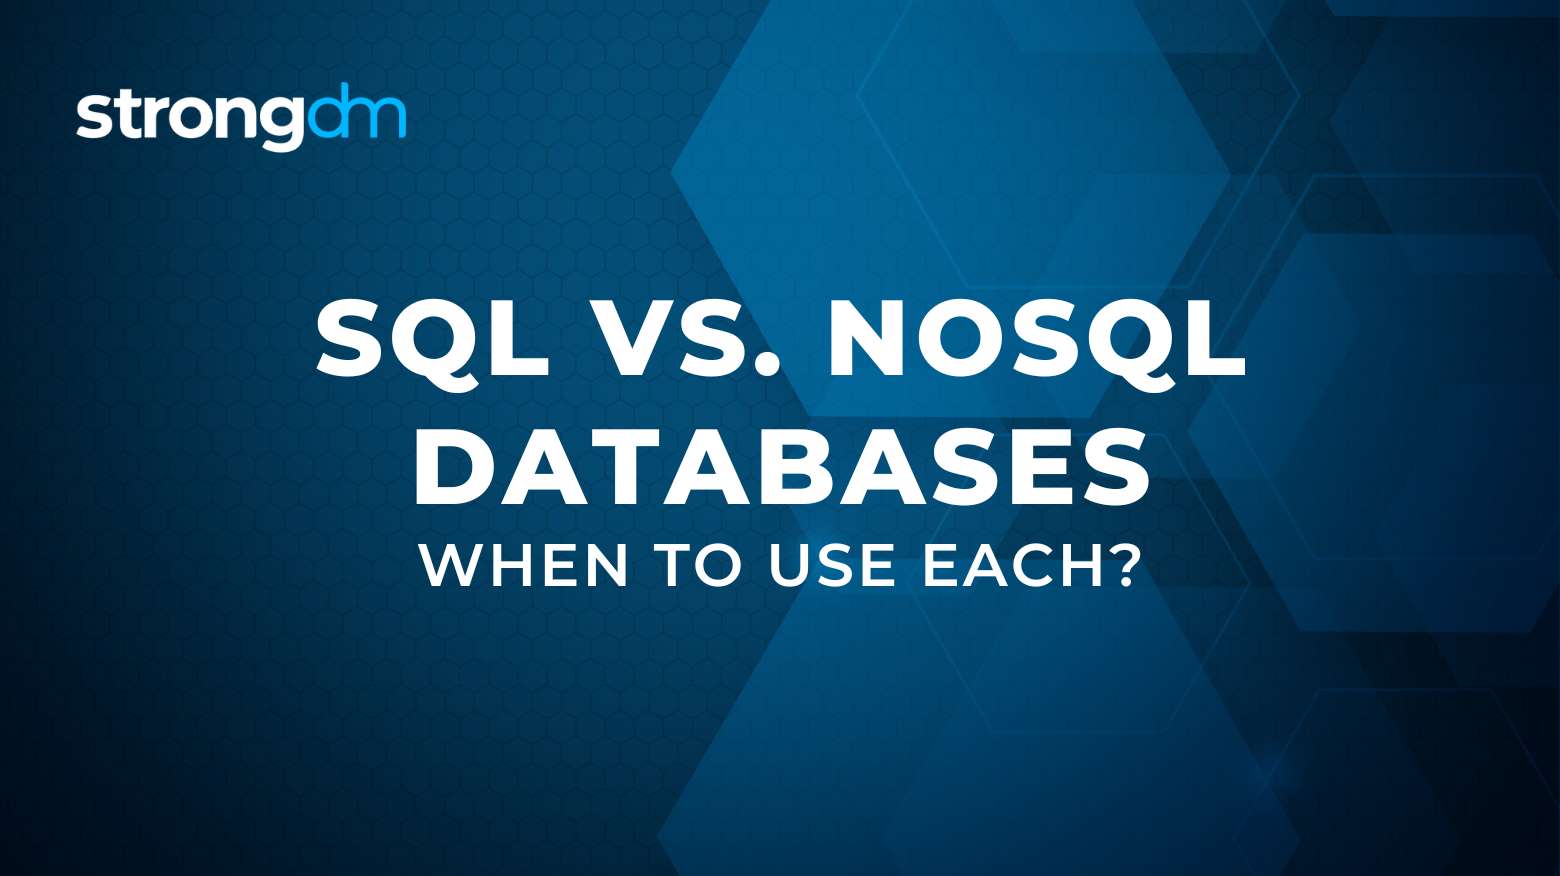 When to Use SQL vs. NoSQL Databases